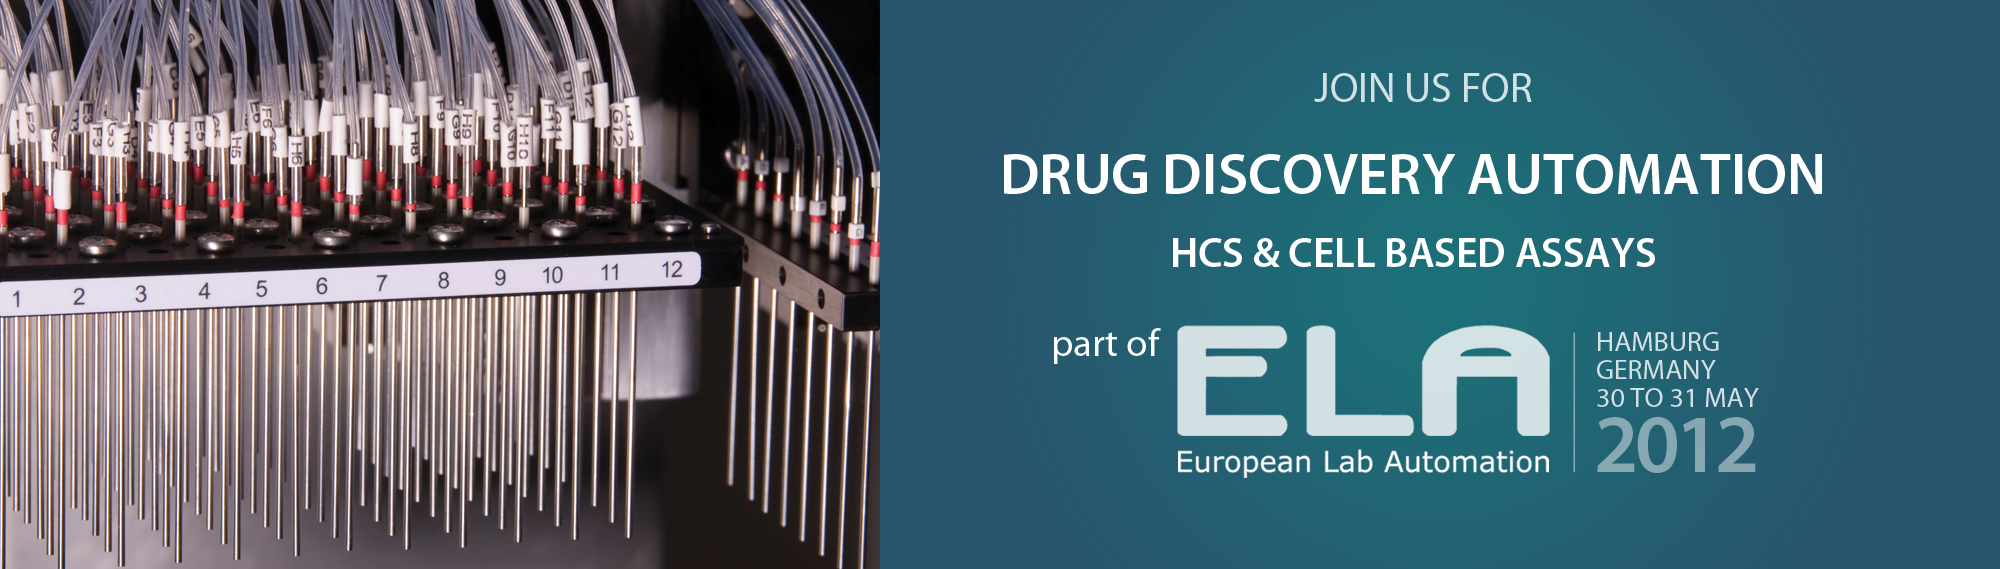 Drug Discovery Automation - HCS & Cell Based Assays